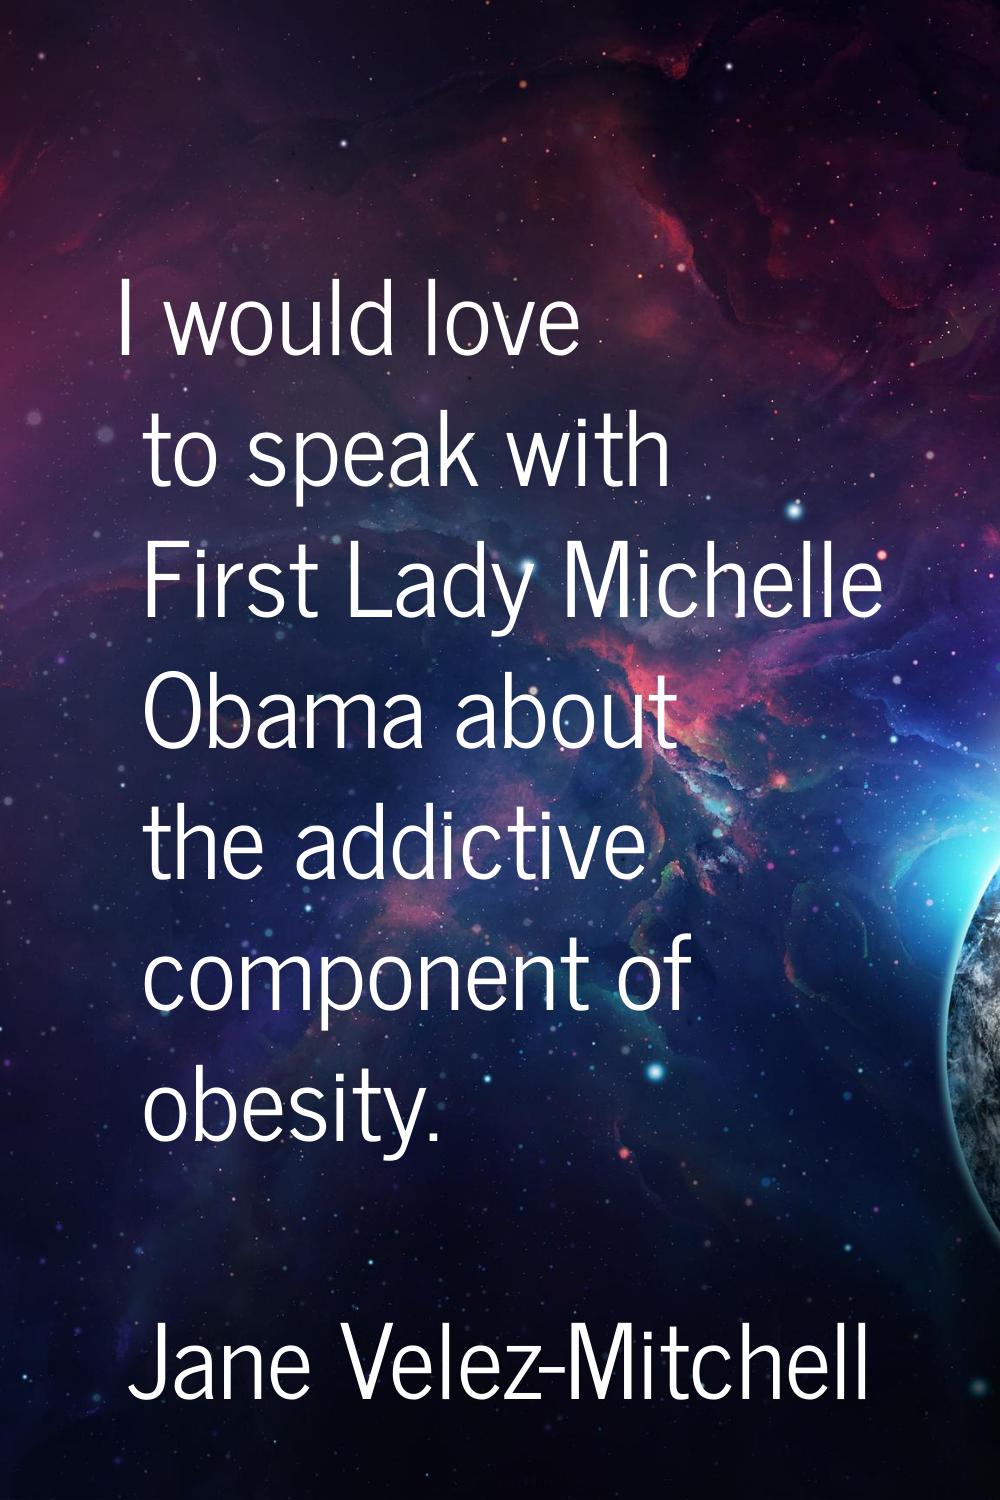 I would love to speak with First Lady Michelle Obama about the addictive component of obesity.